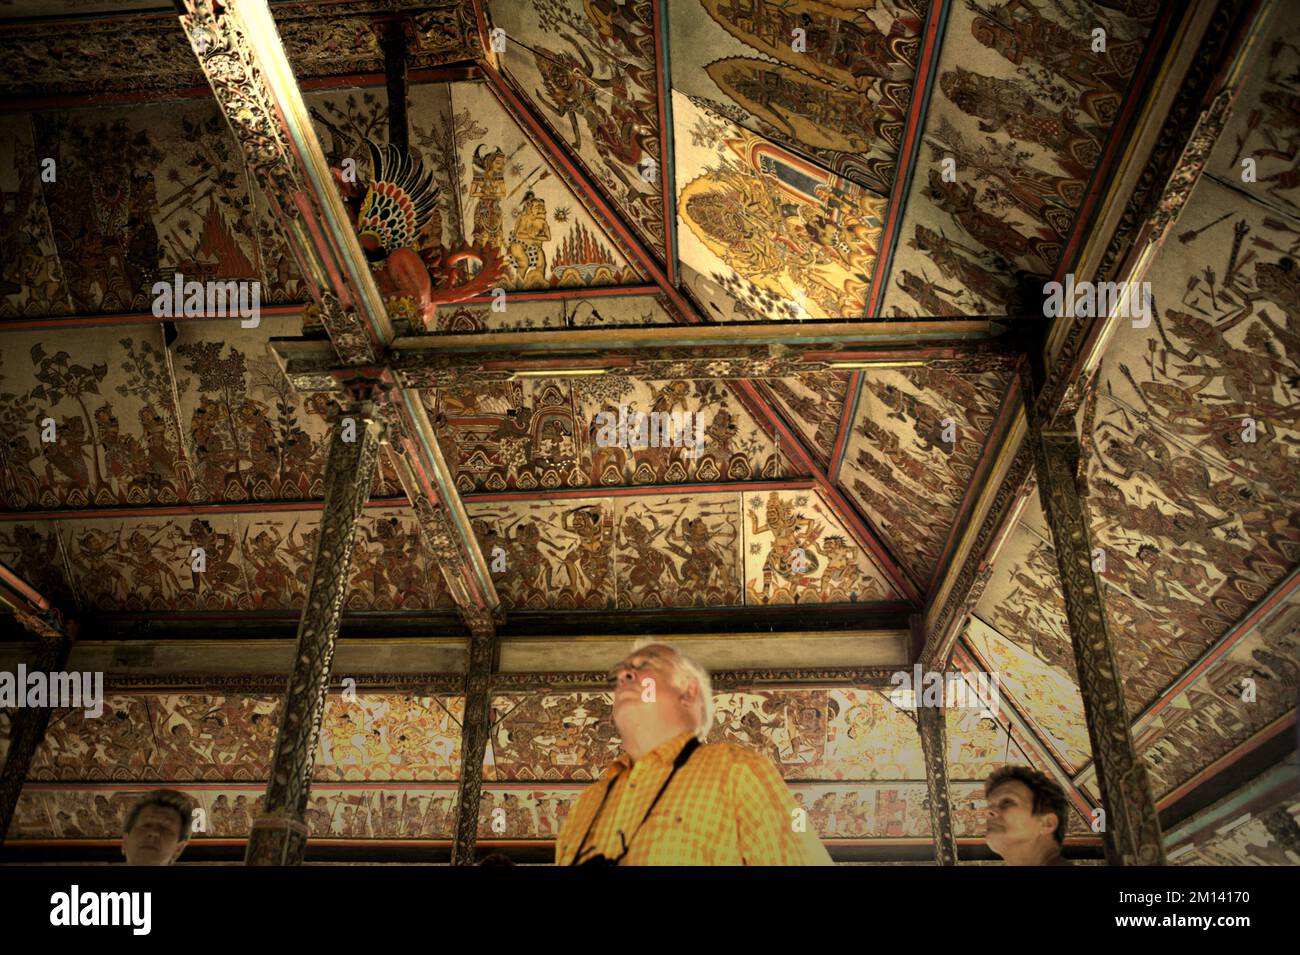 Tourists at Kertha Gosa, an iconic pavilion that its ceiling showcasing old, traditional Balinese Kamasan painting style, located in Klungkung, Bali, Stock Photo